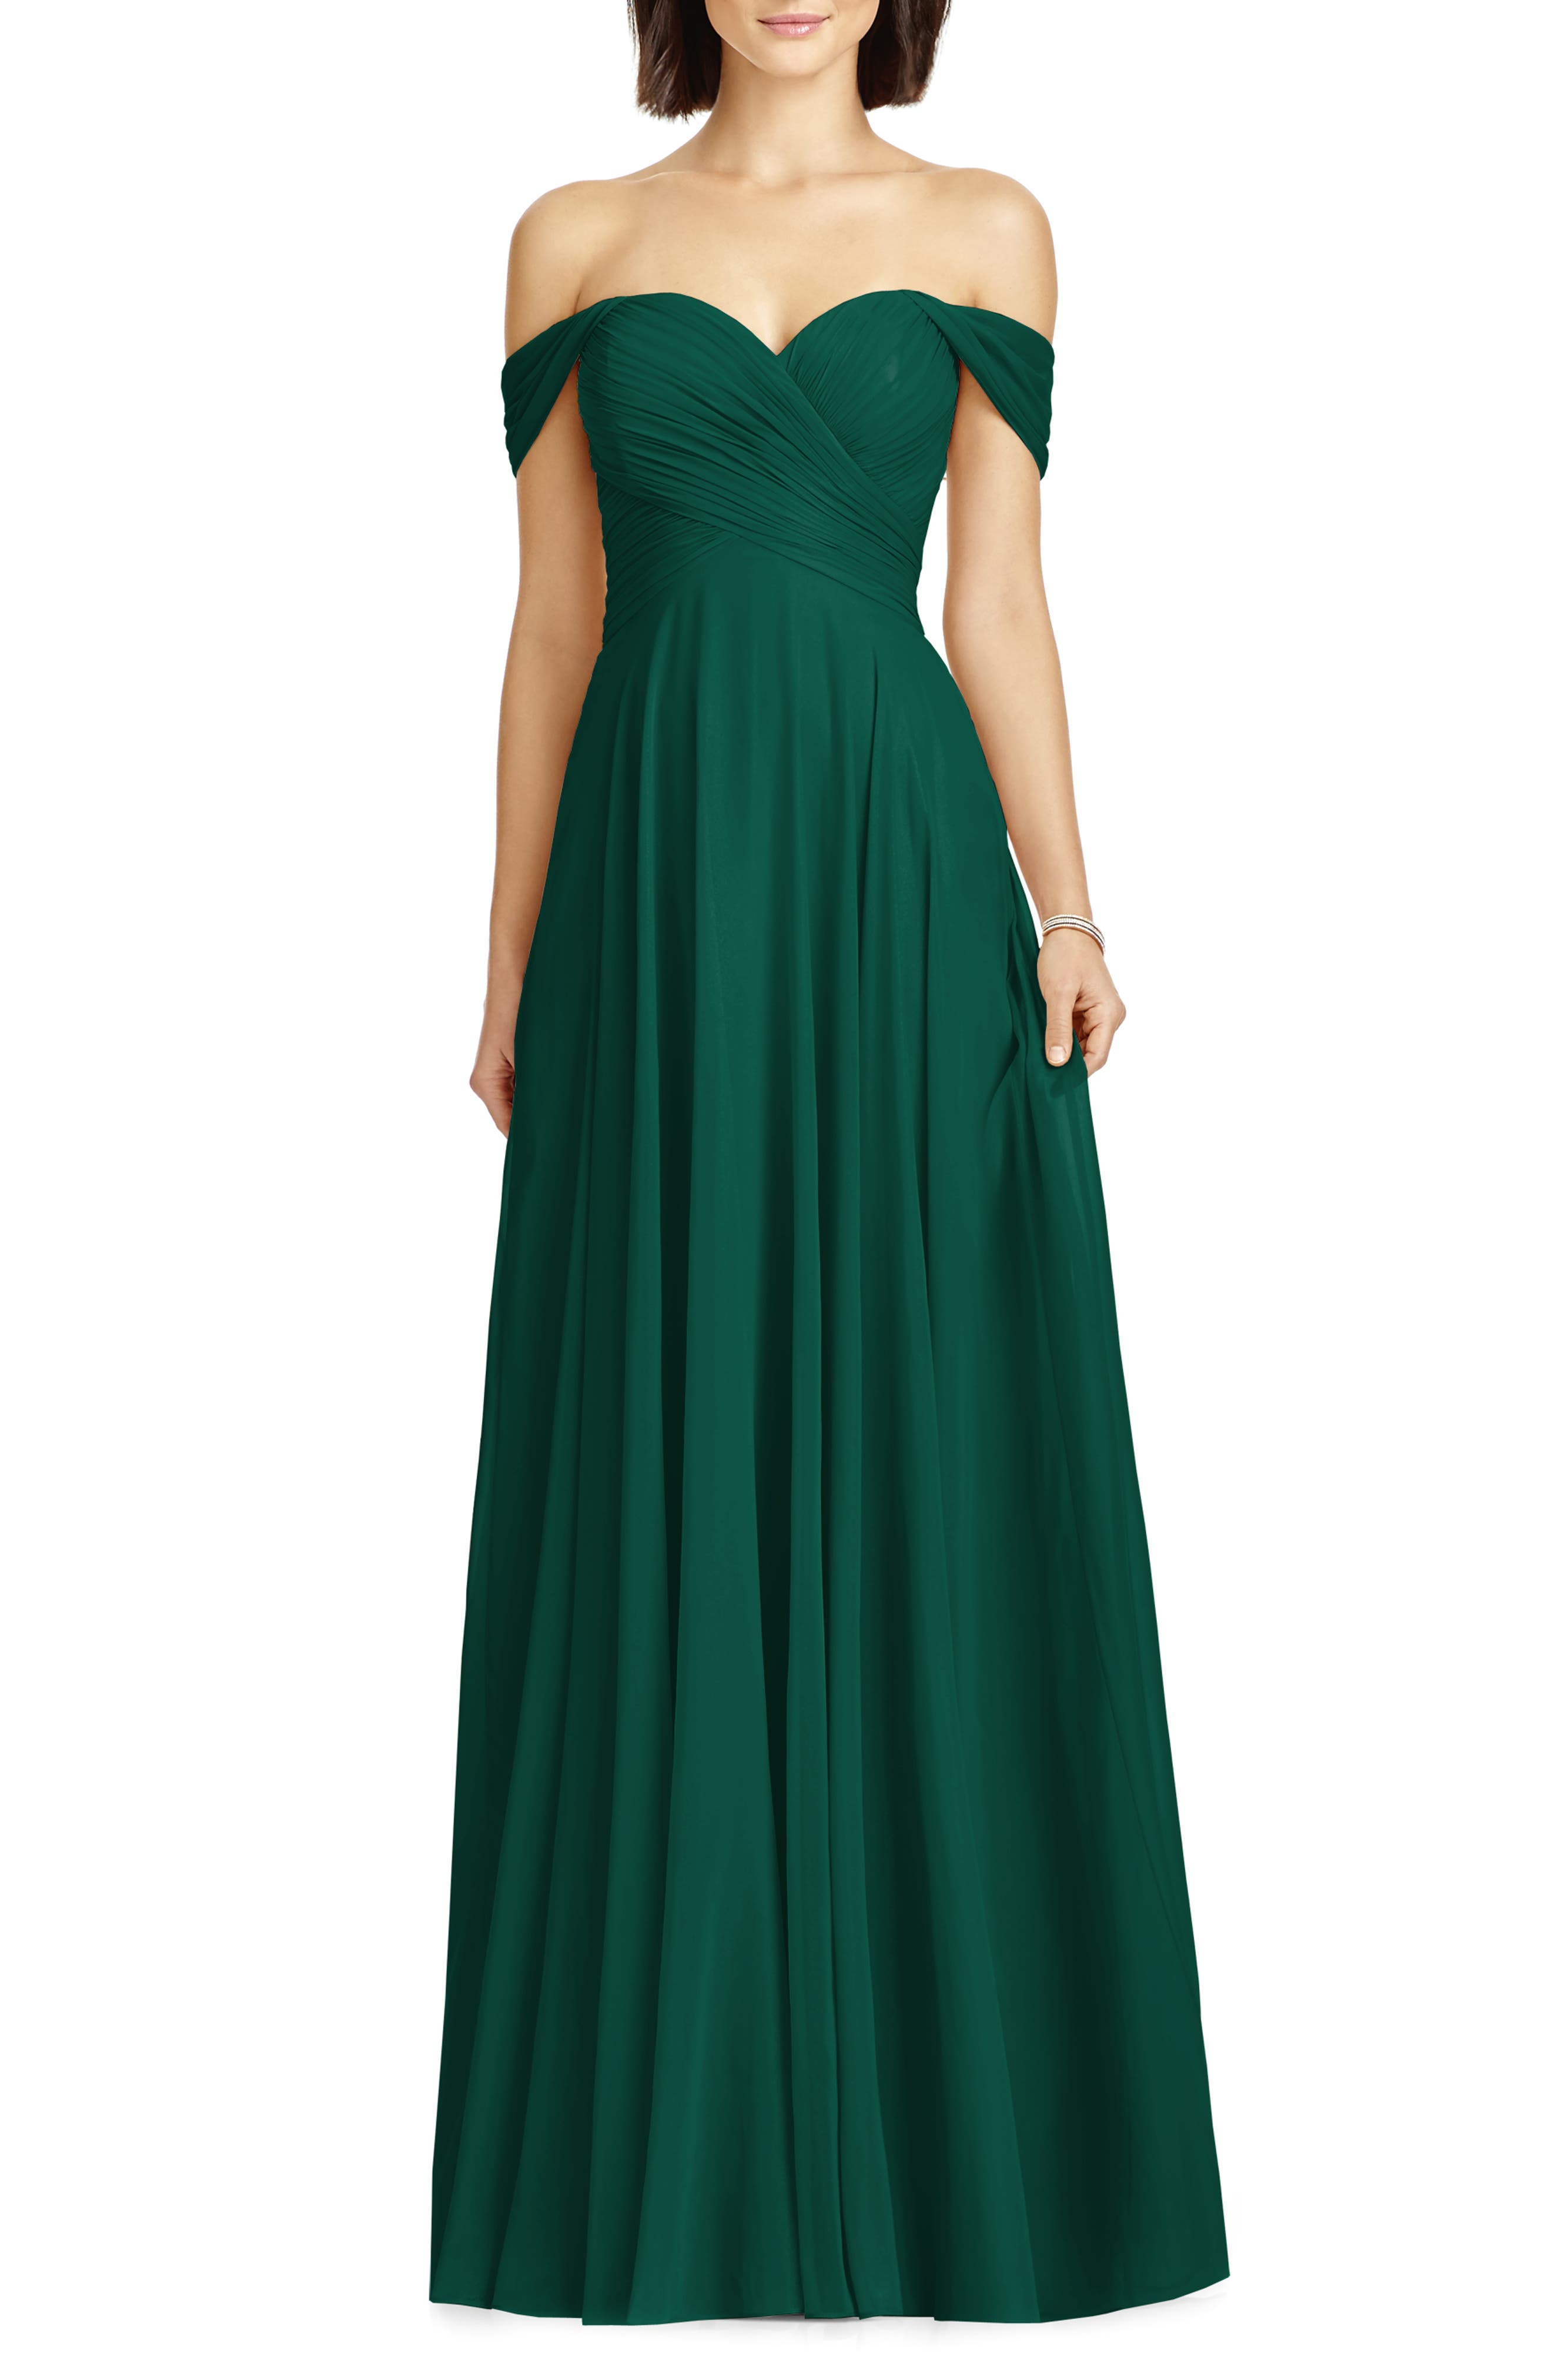 lux ruched off the shoulder chiffon gown